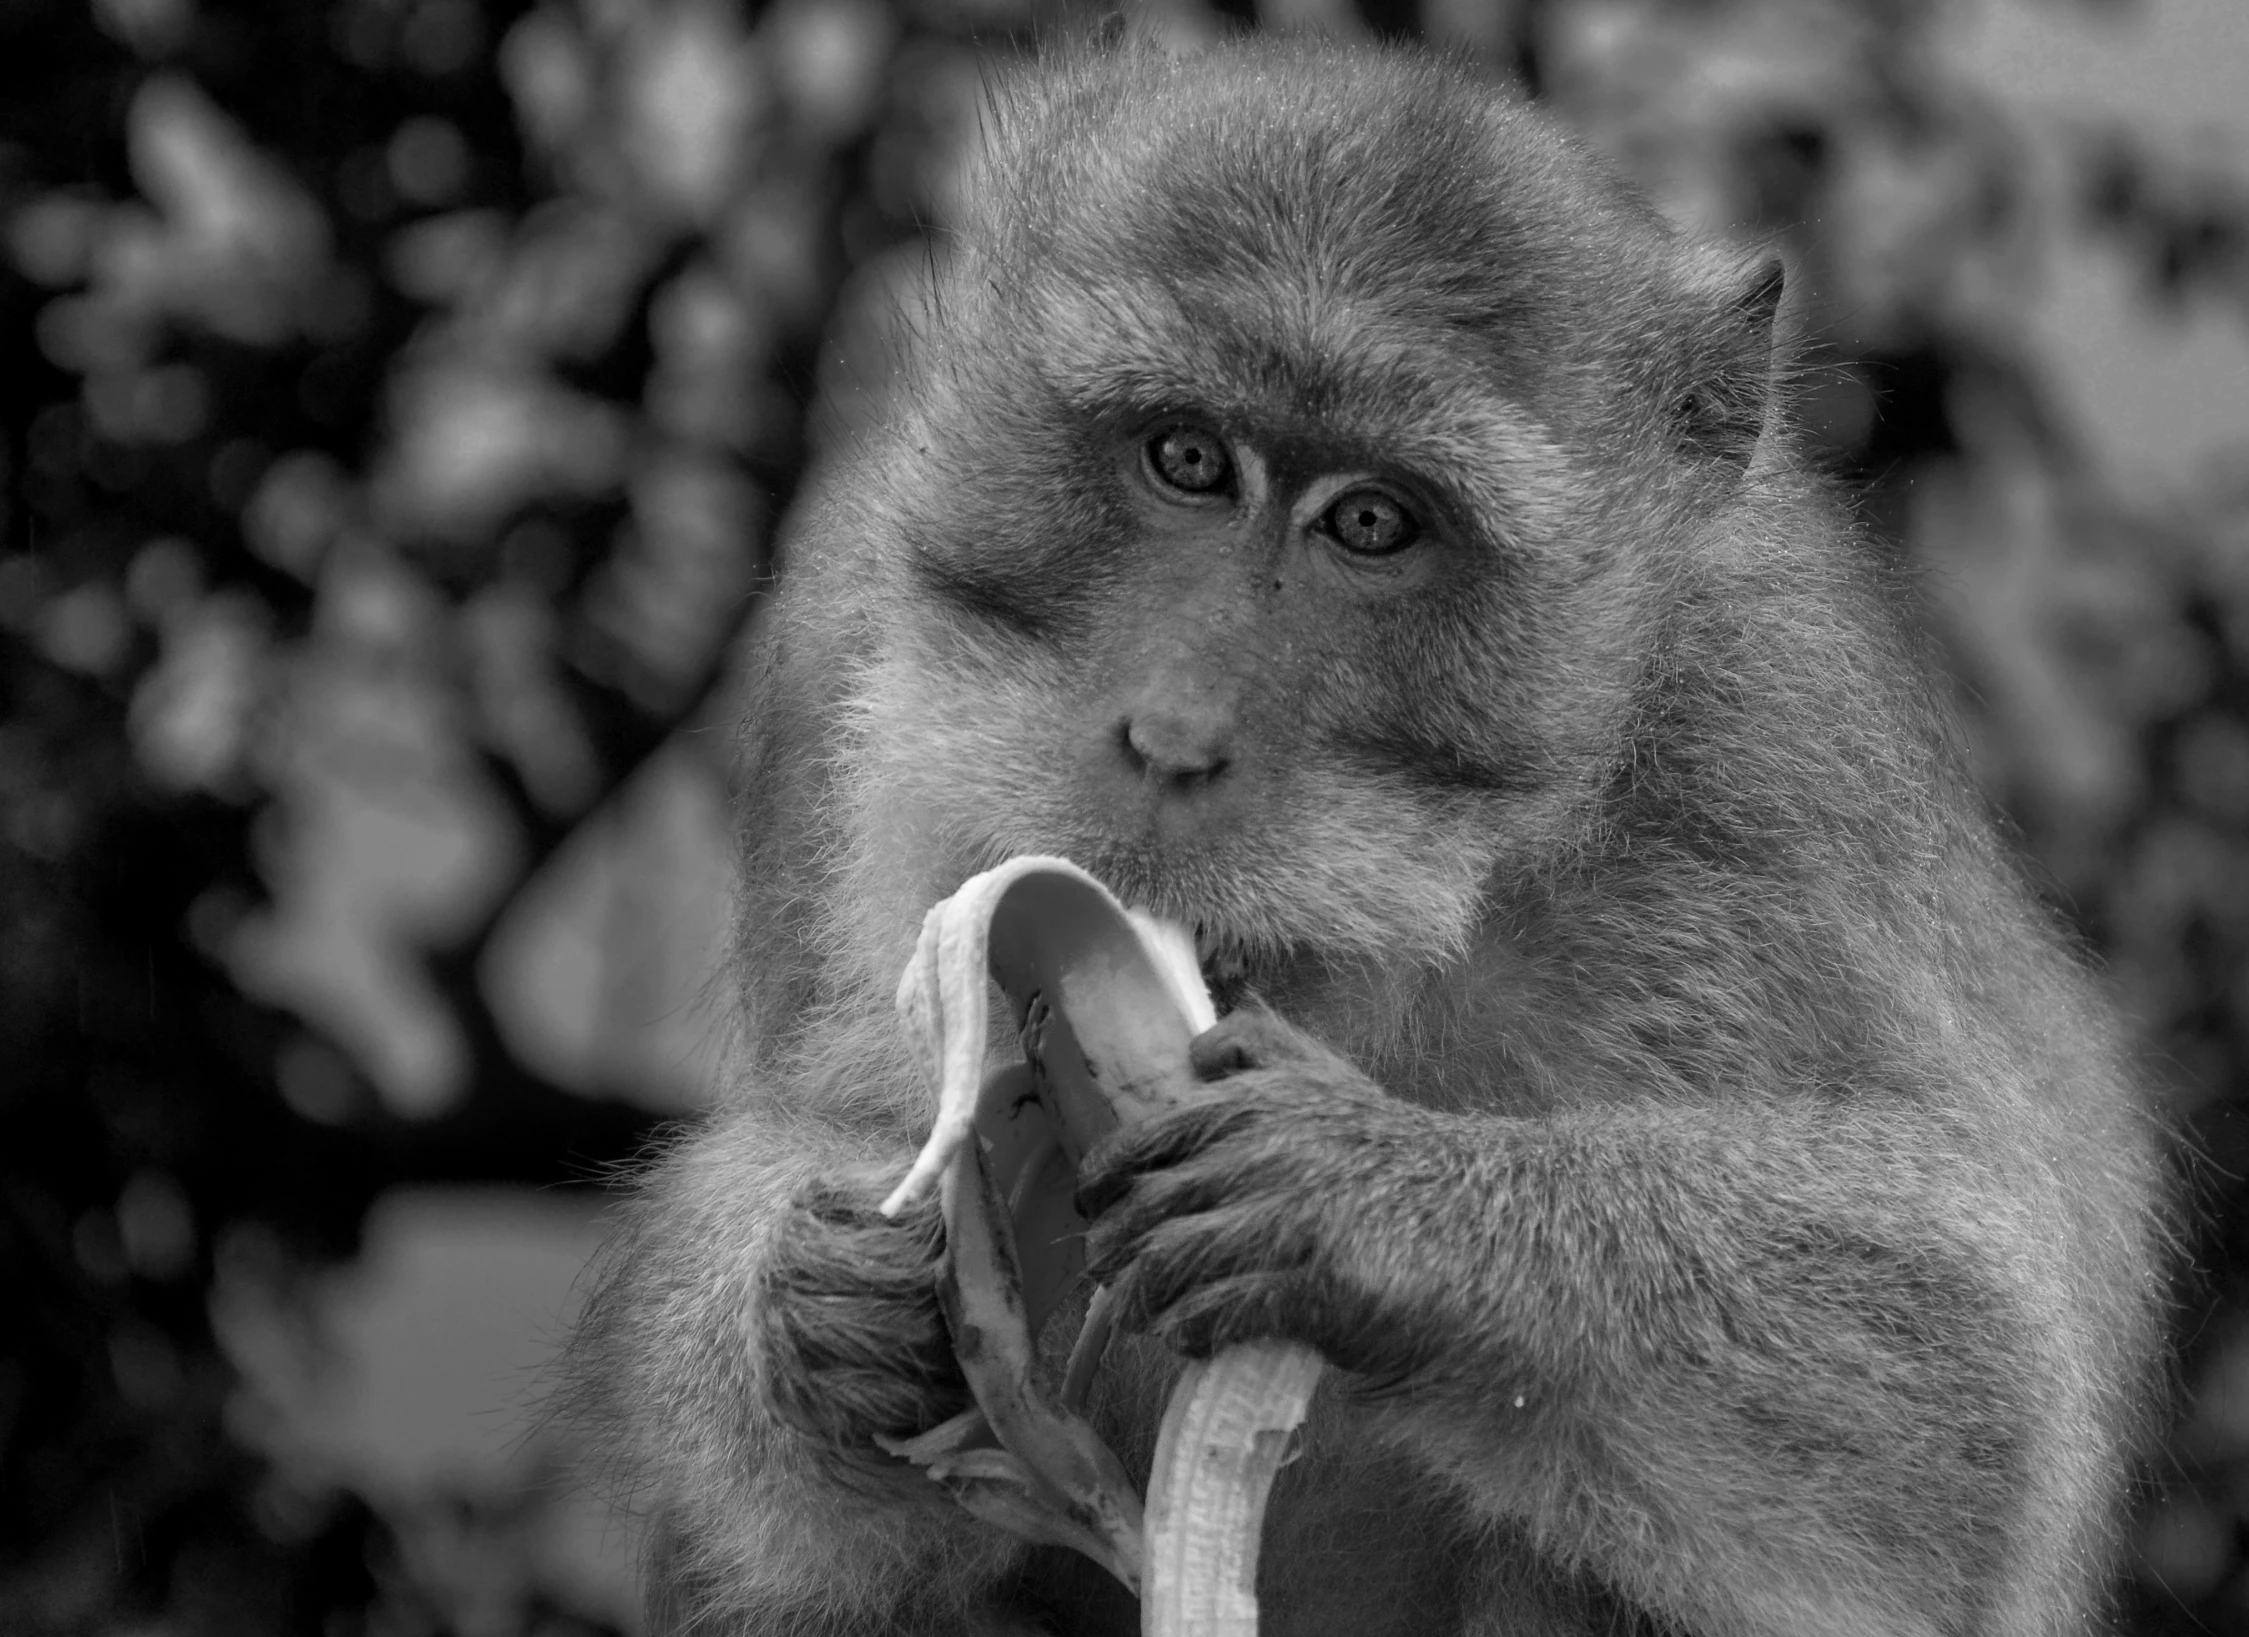 a monkey eating a banana with its hand